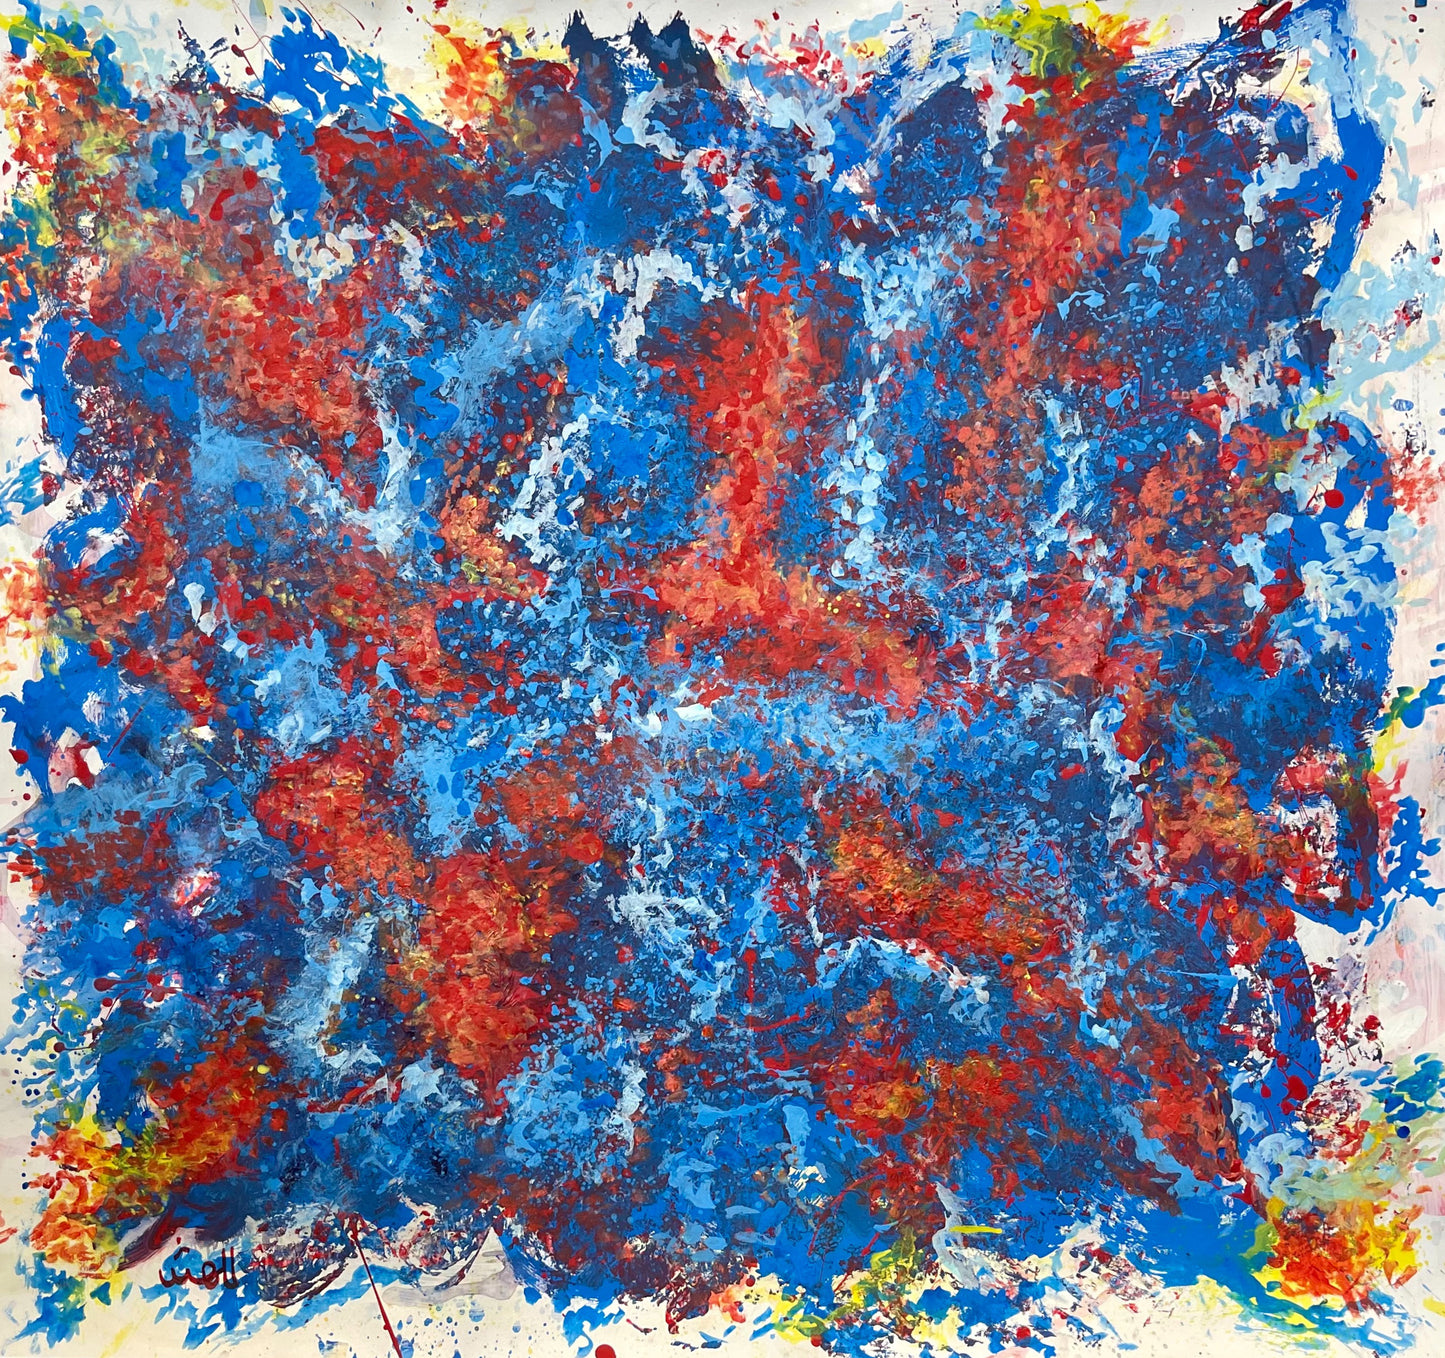 Cooling Down The Heat-Sonarta.com, When it is burning hot and heat is destroying the path, bring in calm and cool blue water to smooth out all of the rough edges.  This Contemporary Painting is an Acrylic on Paper by Shahla Rahimi Reynolds.  Cooling Down The Heat Painting is 45" H x 48" W.